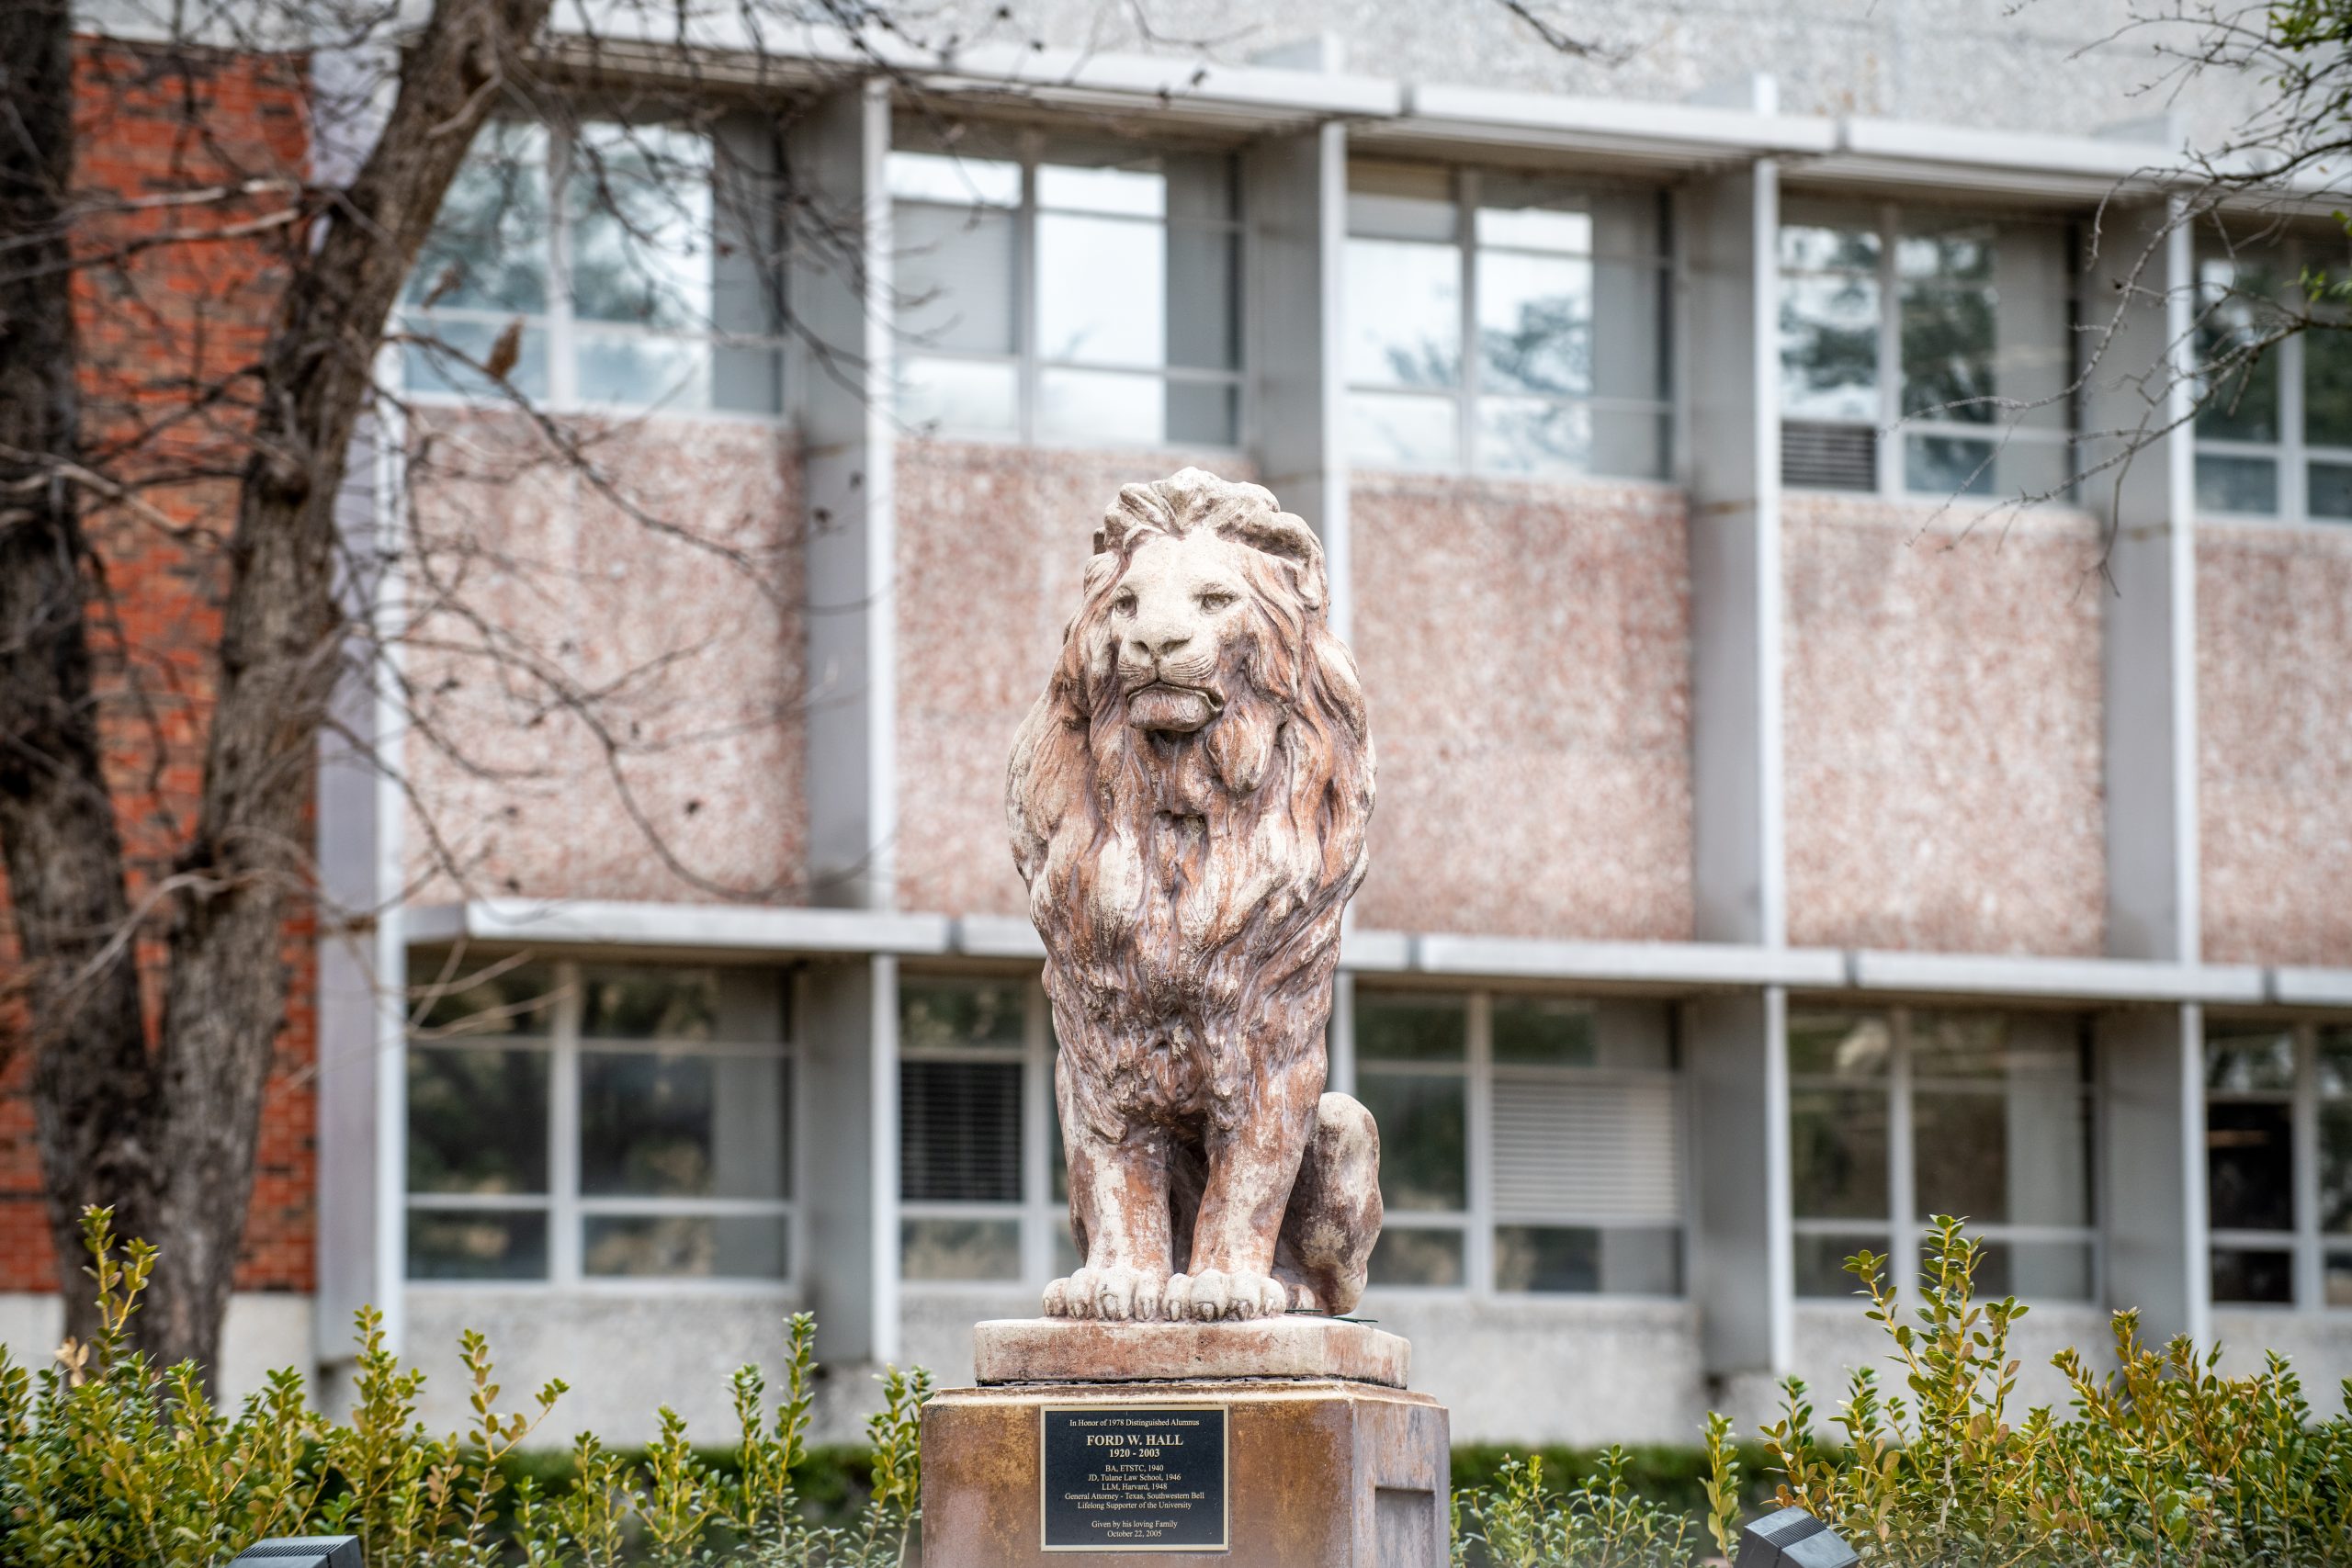 The lion statue in front of the library building.